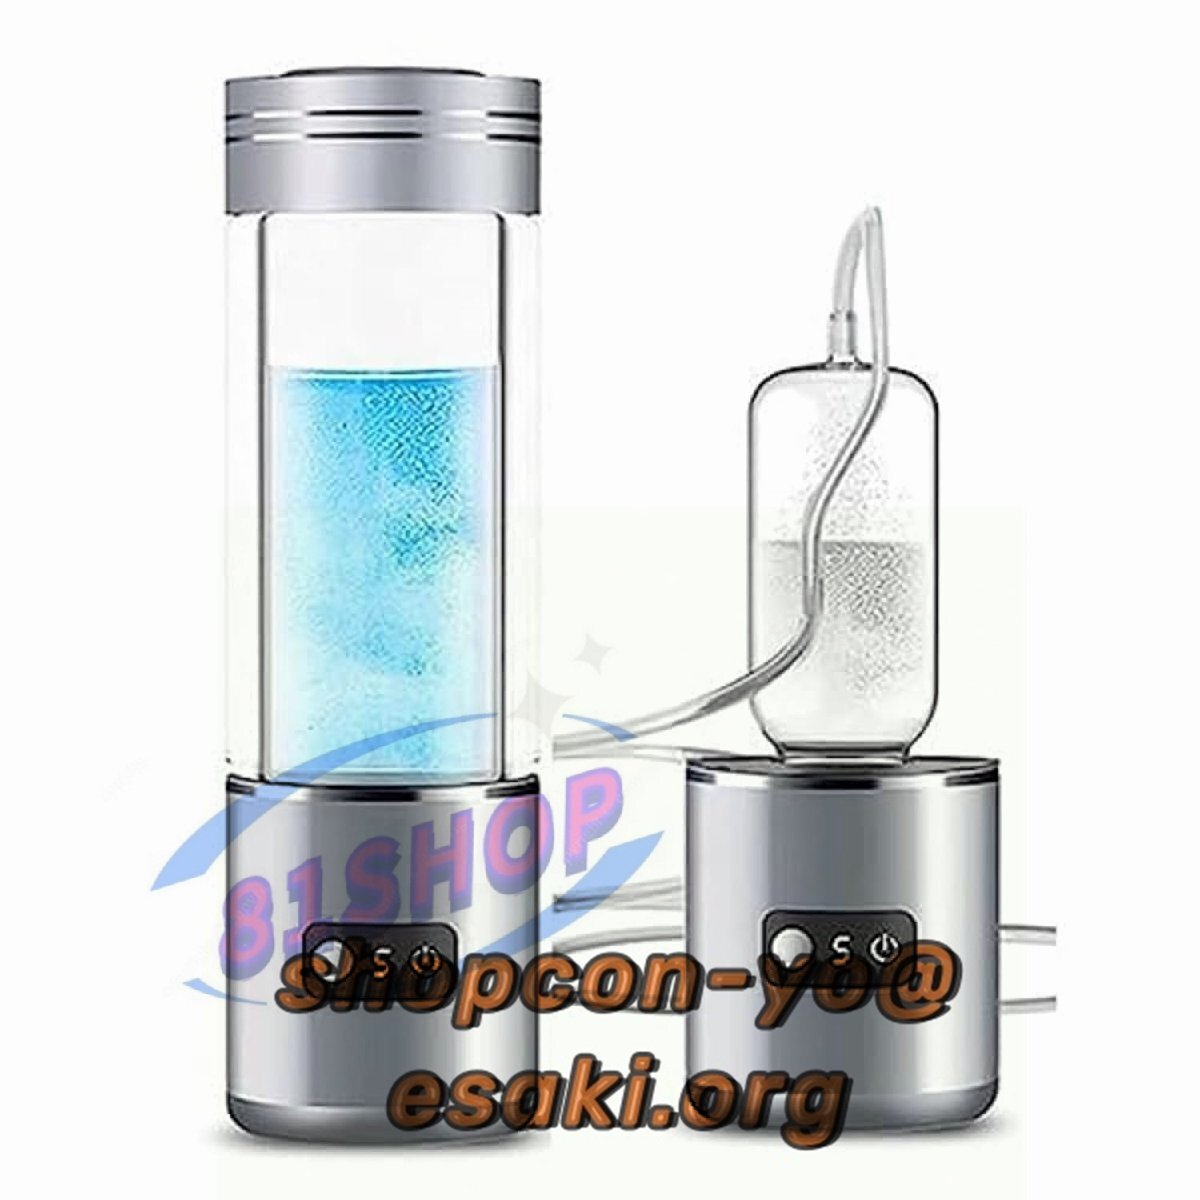  water element aquatic . vessel high density portable water element water bottle magnetism adsorption rechargeable 2000PPB 350ML one pcs three position bottle type electrolysis water machine cold water / hot water circulation 